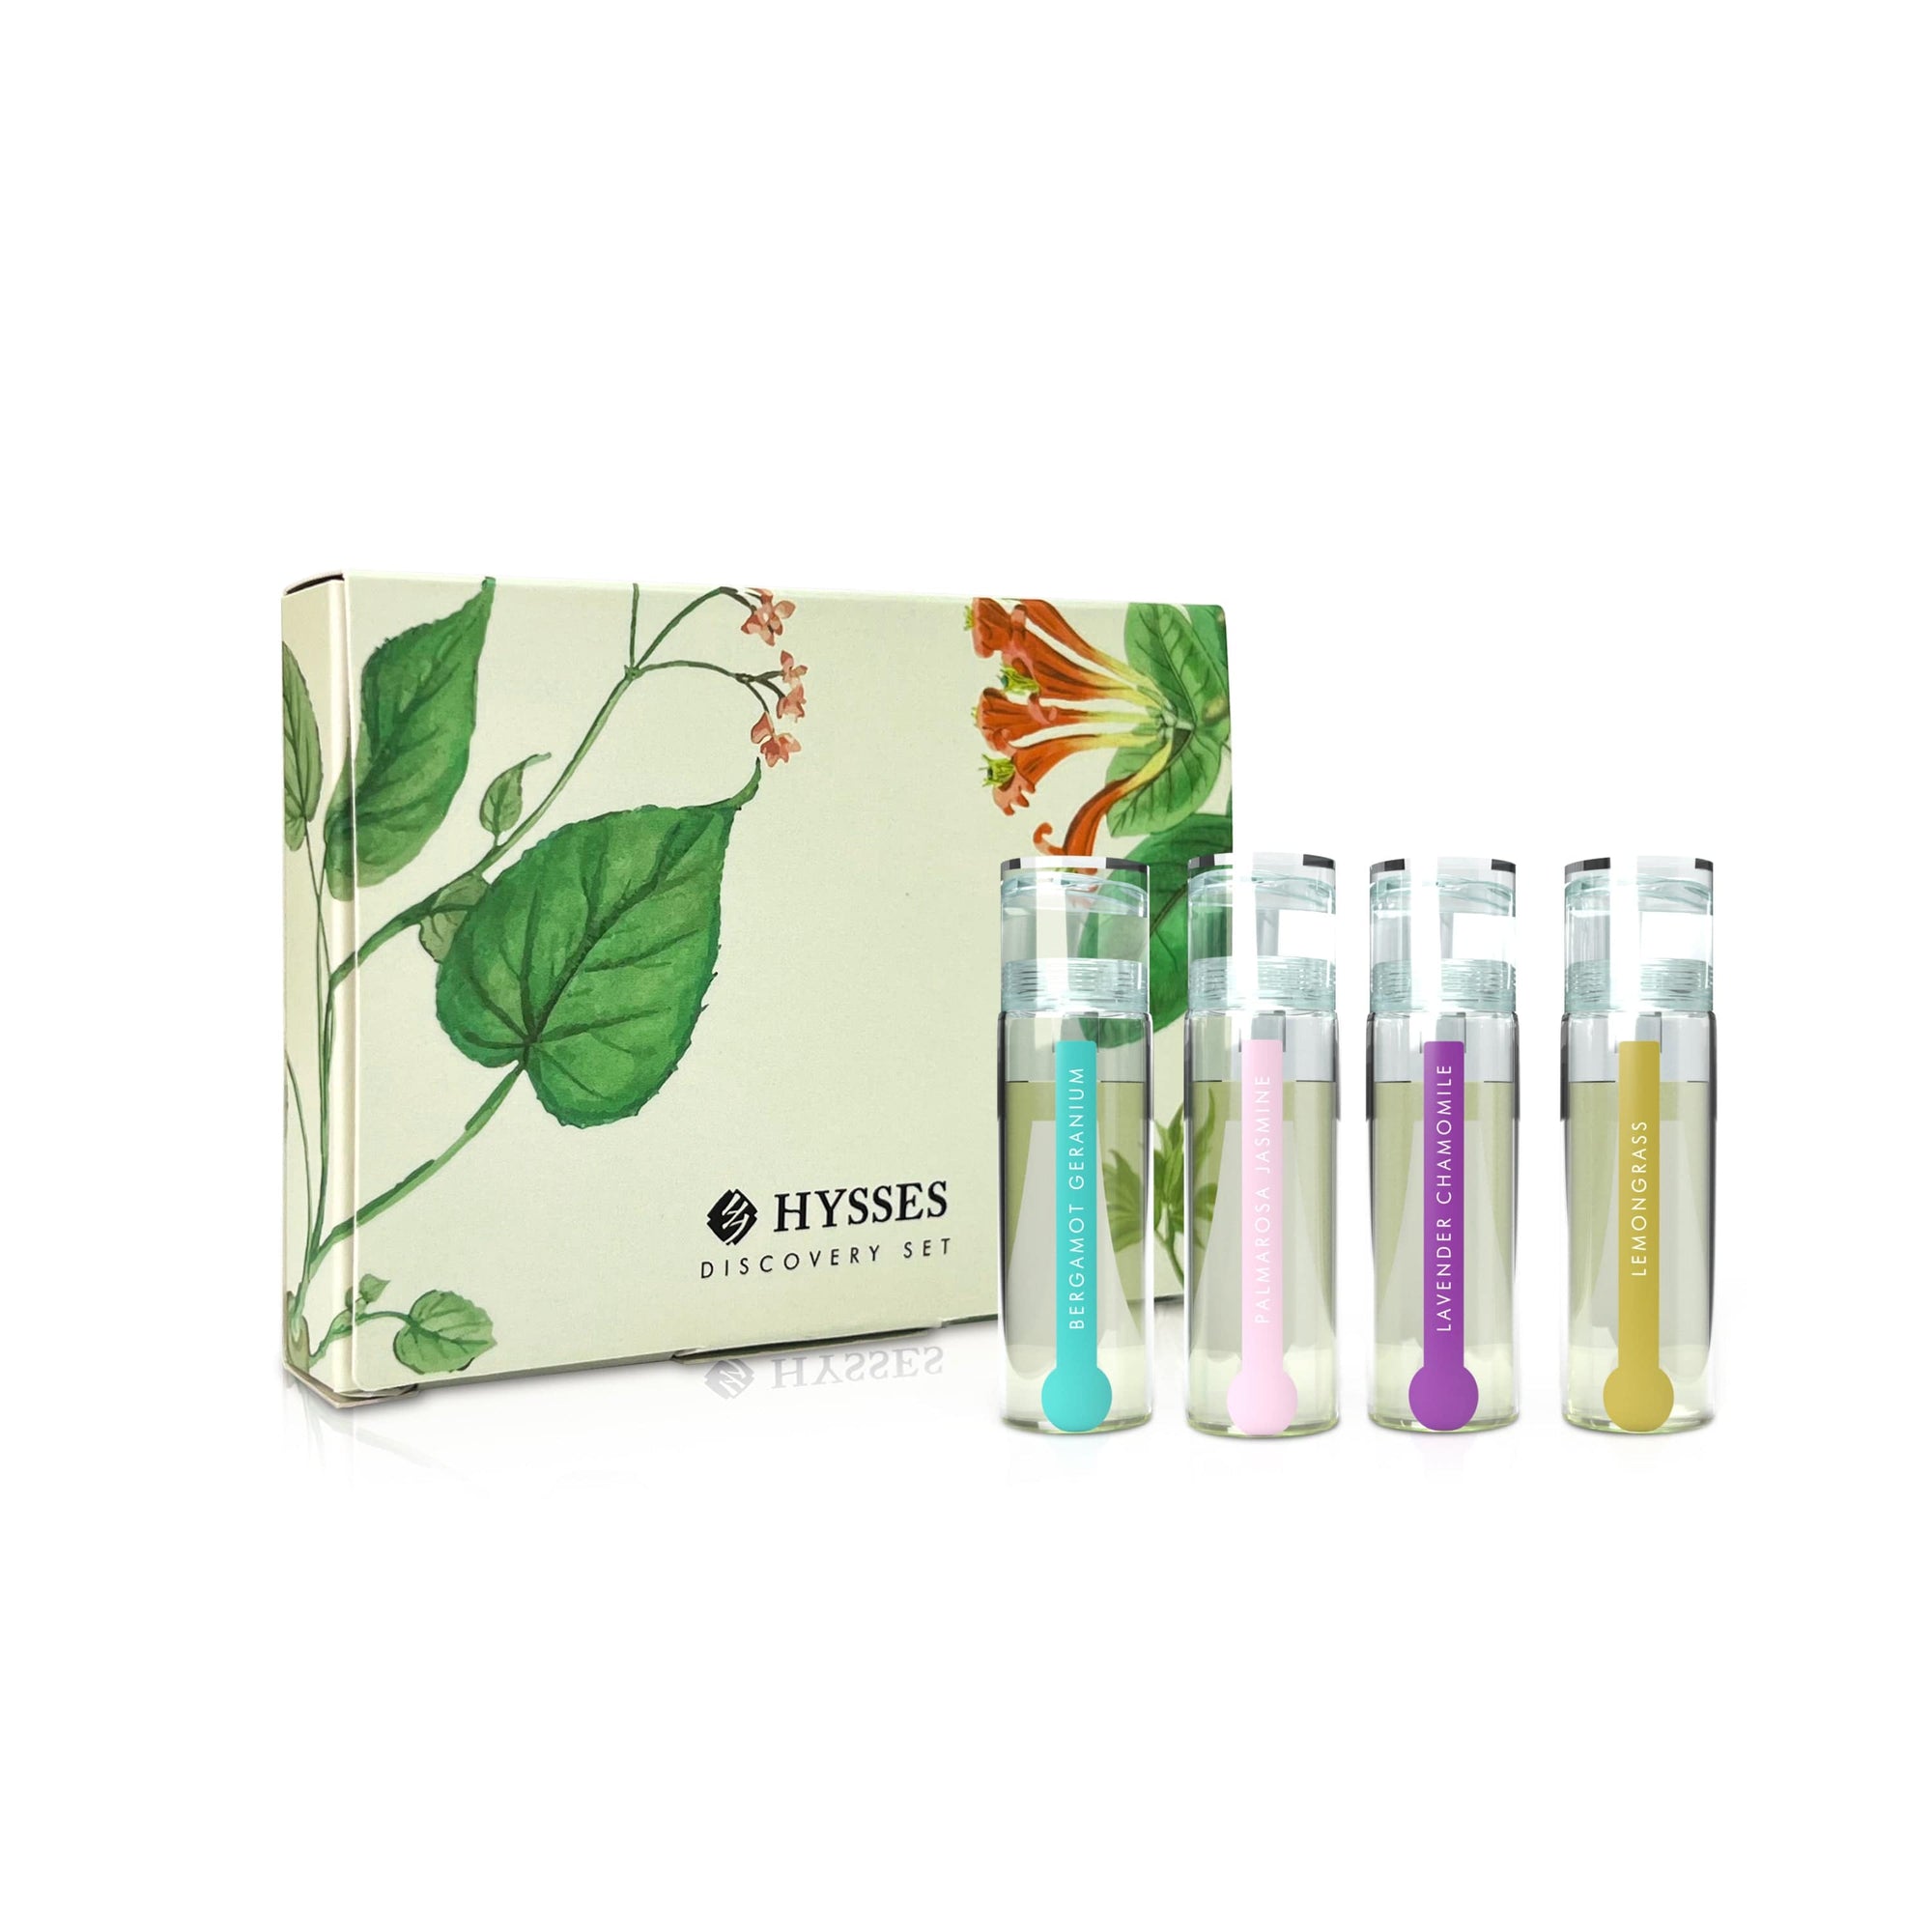 Hysses Home Scents Sample, Room Scent Gift Set of 4